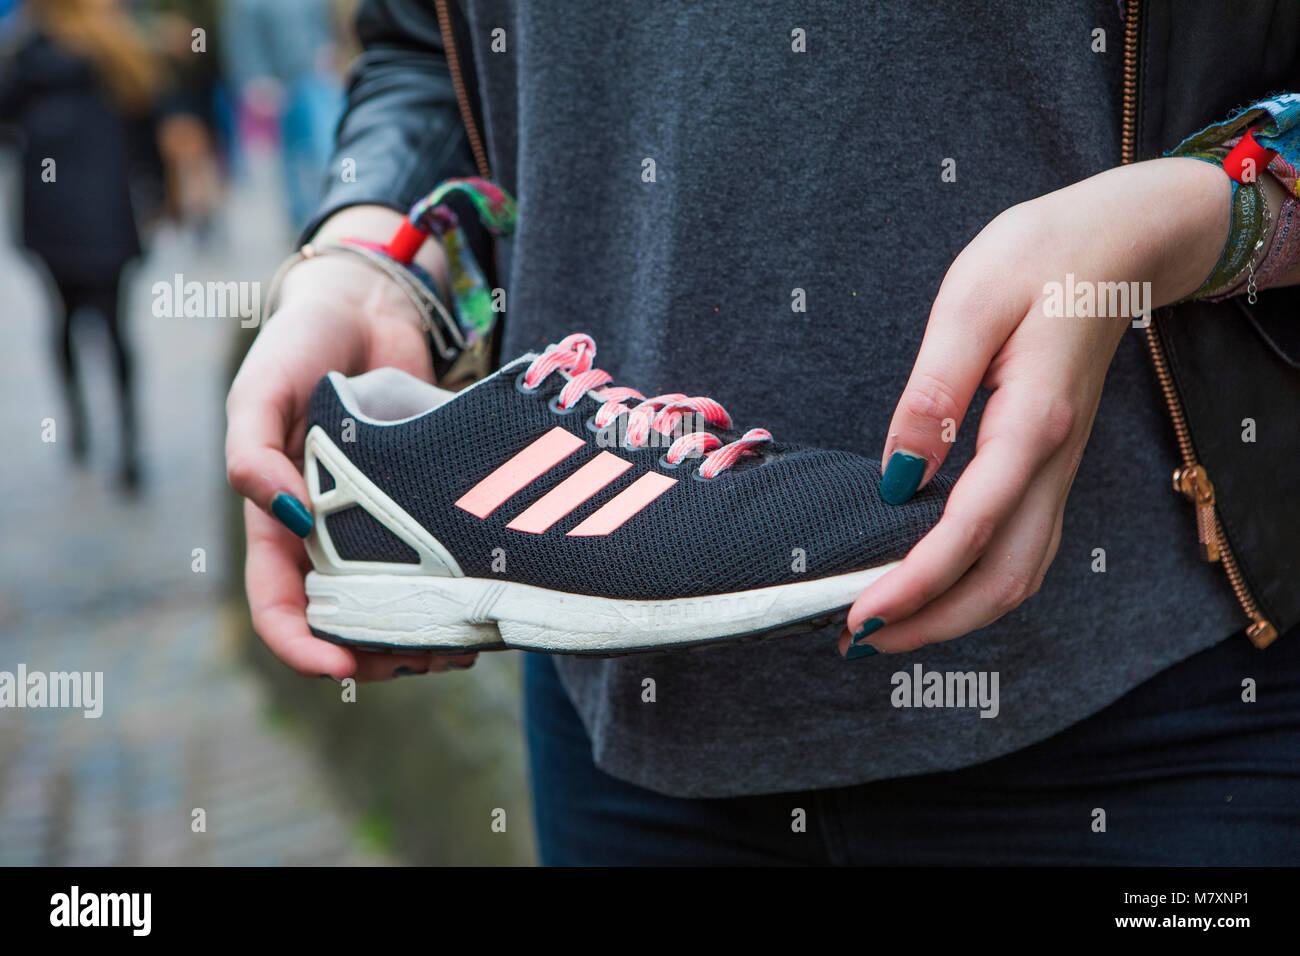 Adidas Stripes High Resolution Stock Photography and Images - Alamy